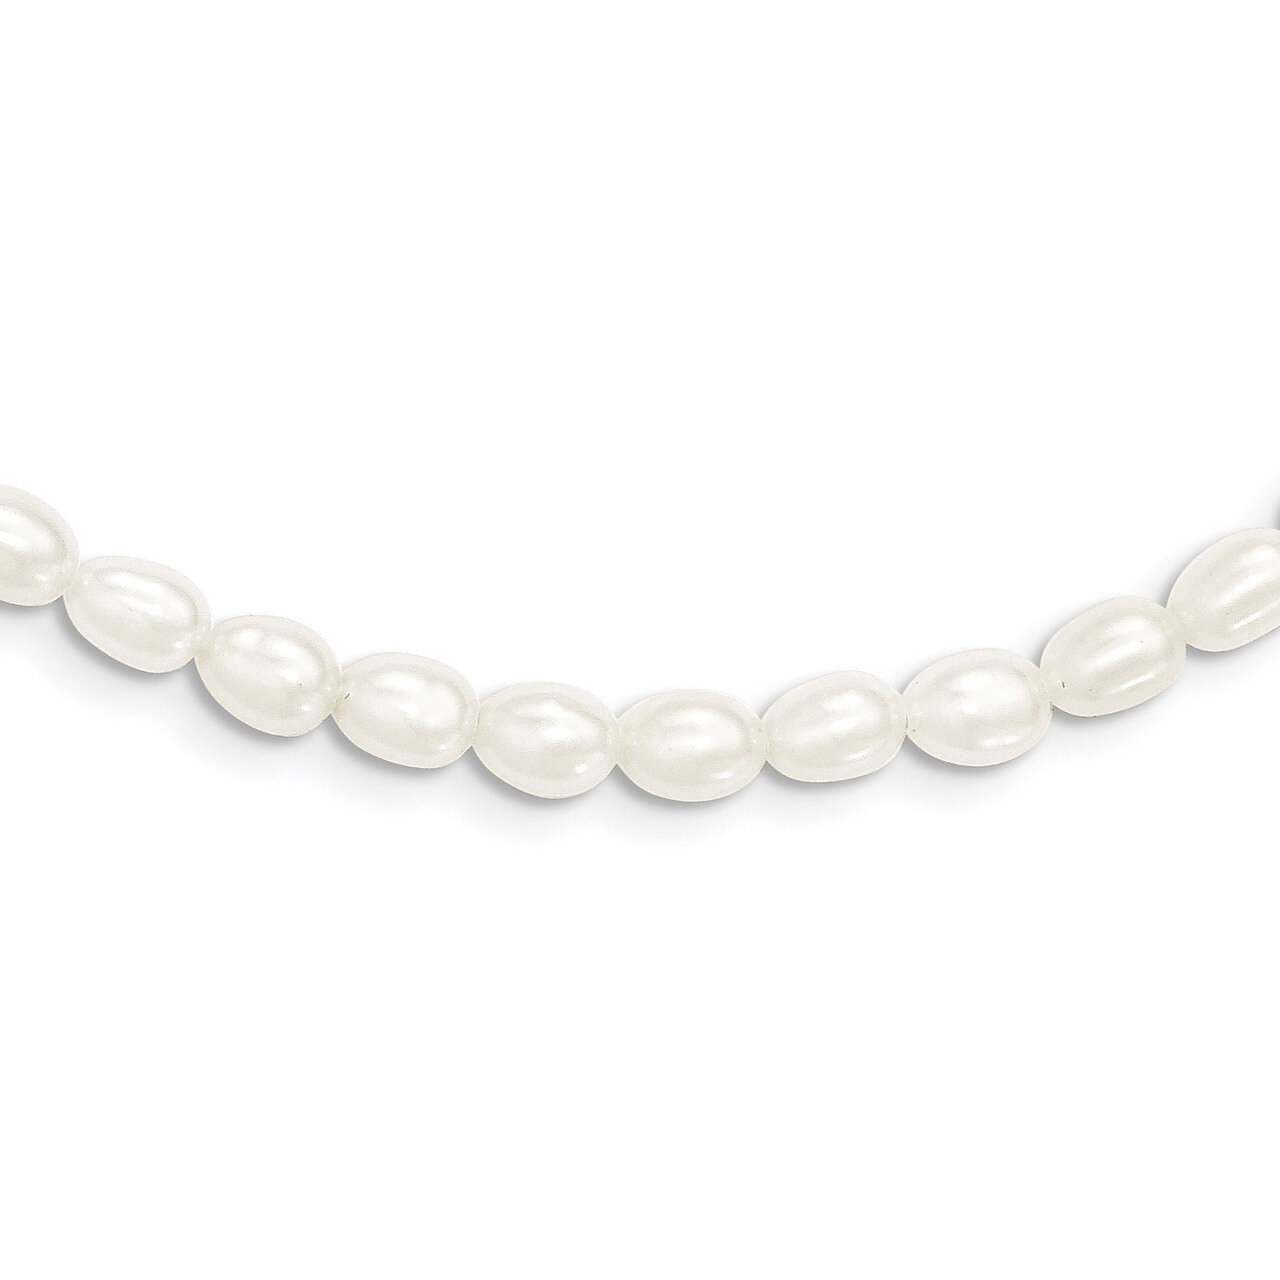 White 4-4.5mm Freshwater Cultured Pearl Necklace 13 Inch Sterling Silver QH5281-13